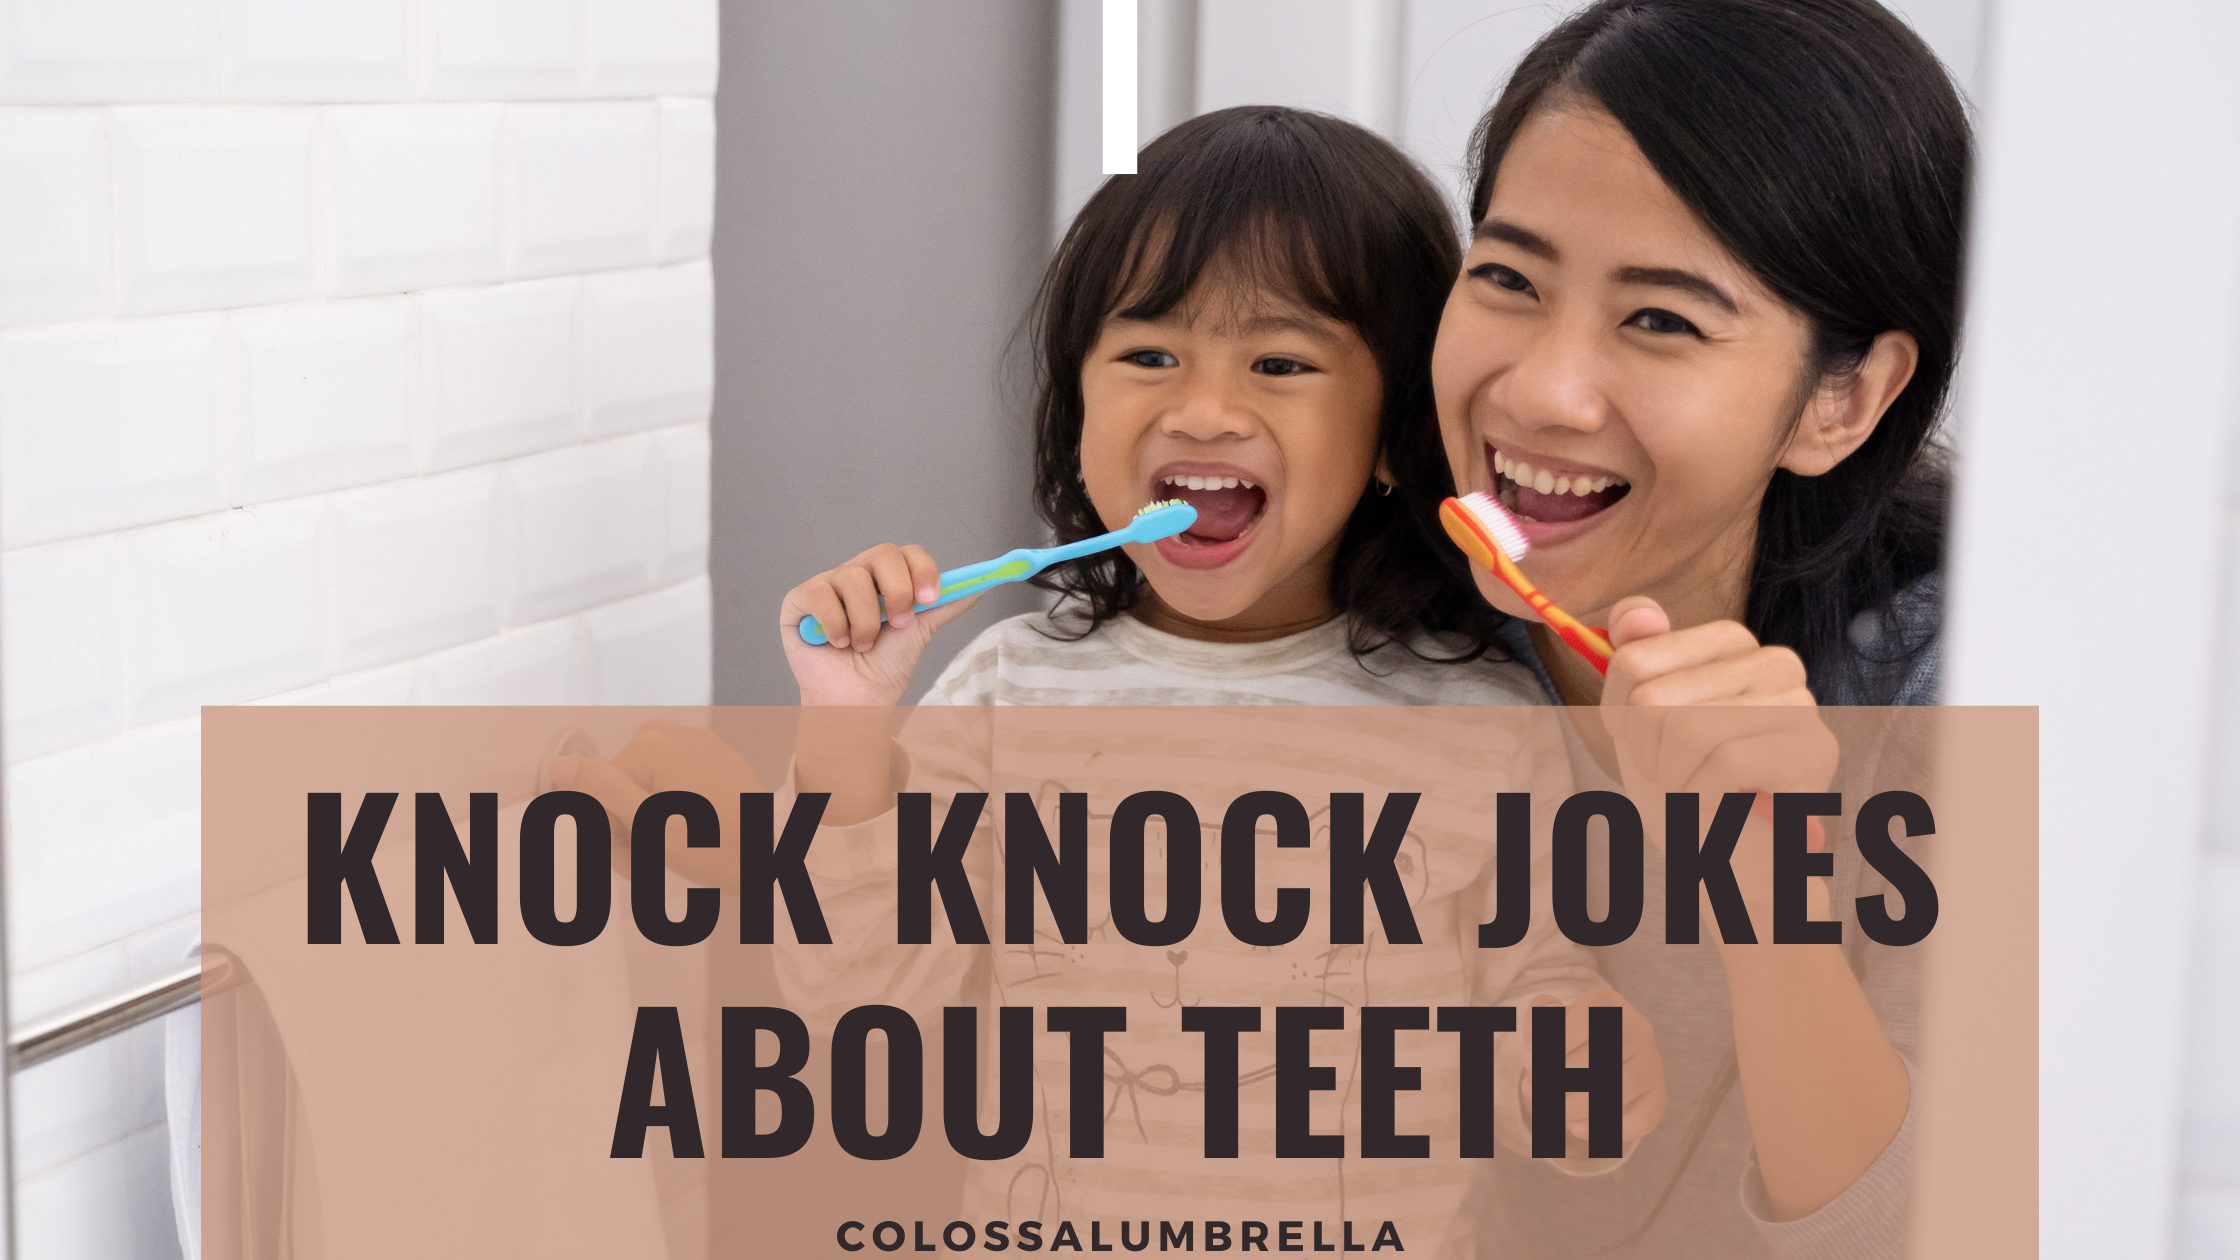 50+ Funny and Comforting Knock Knock Jokes about teeth